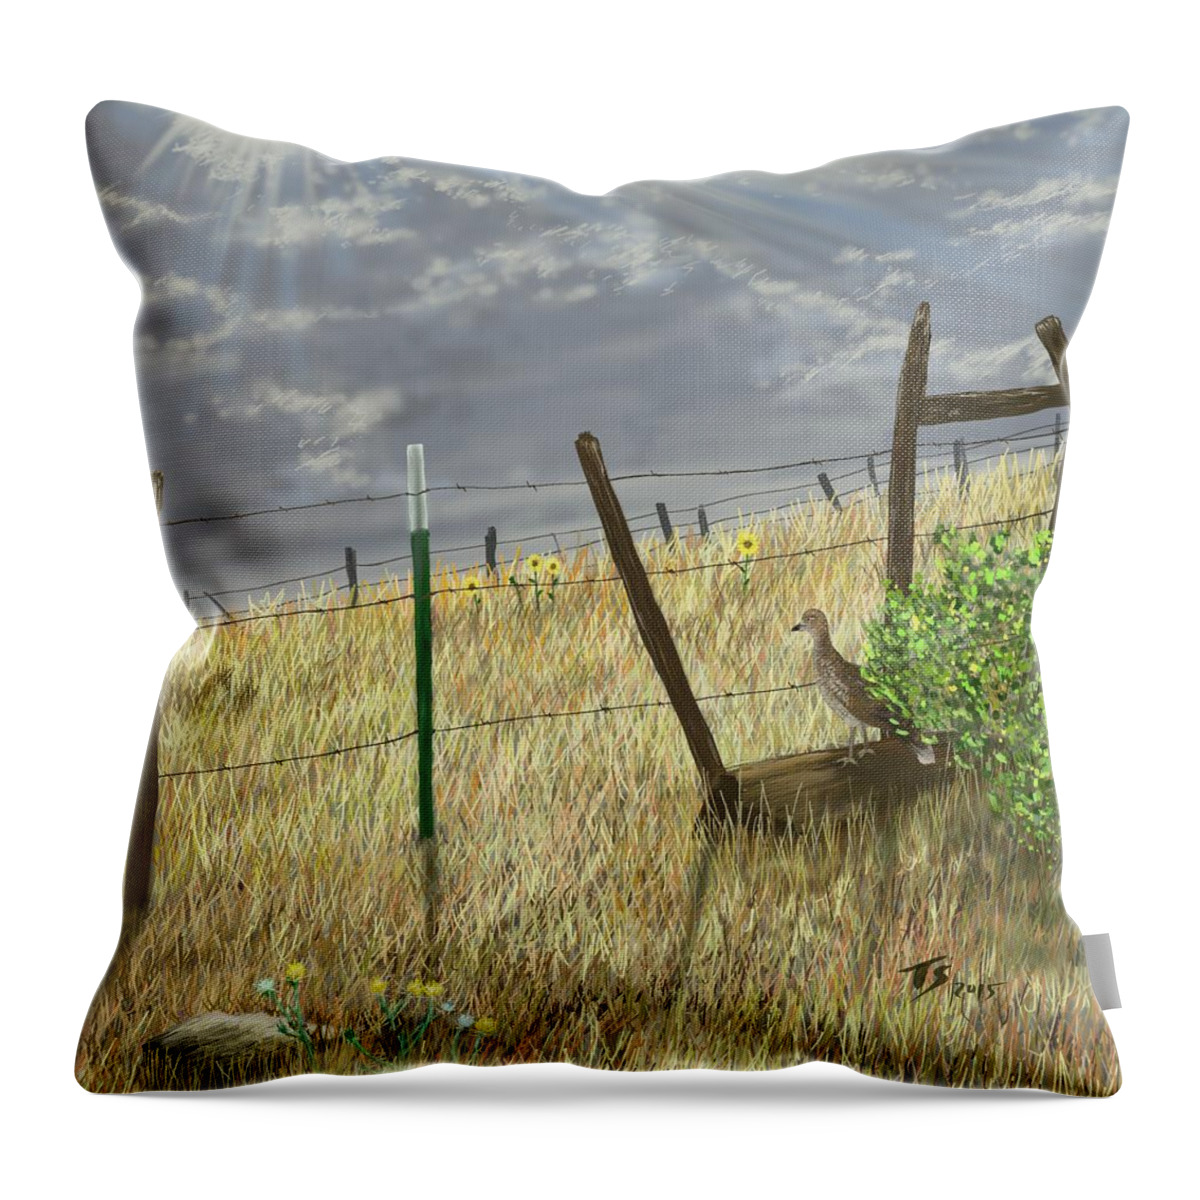 Washington Throw Pillow featuring the digital art Odd Post by Troy Stapek